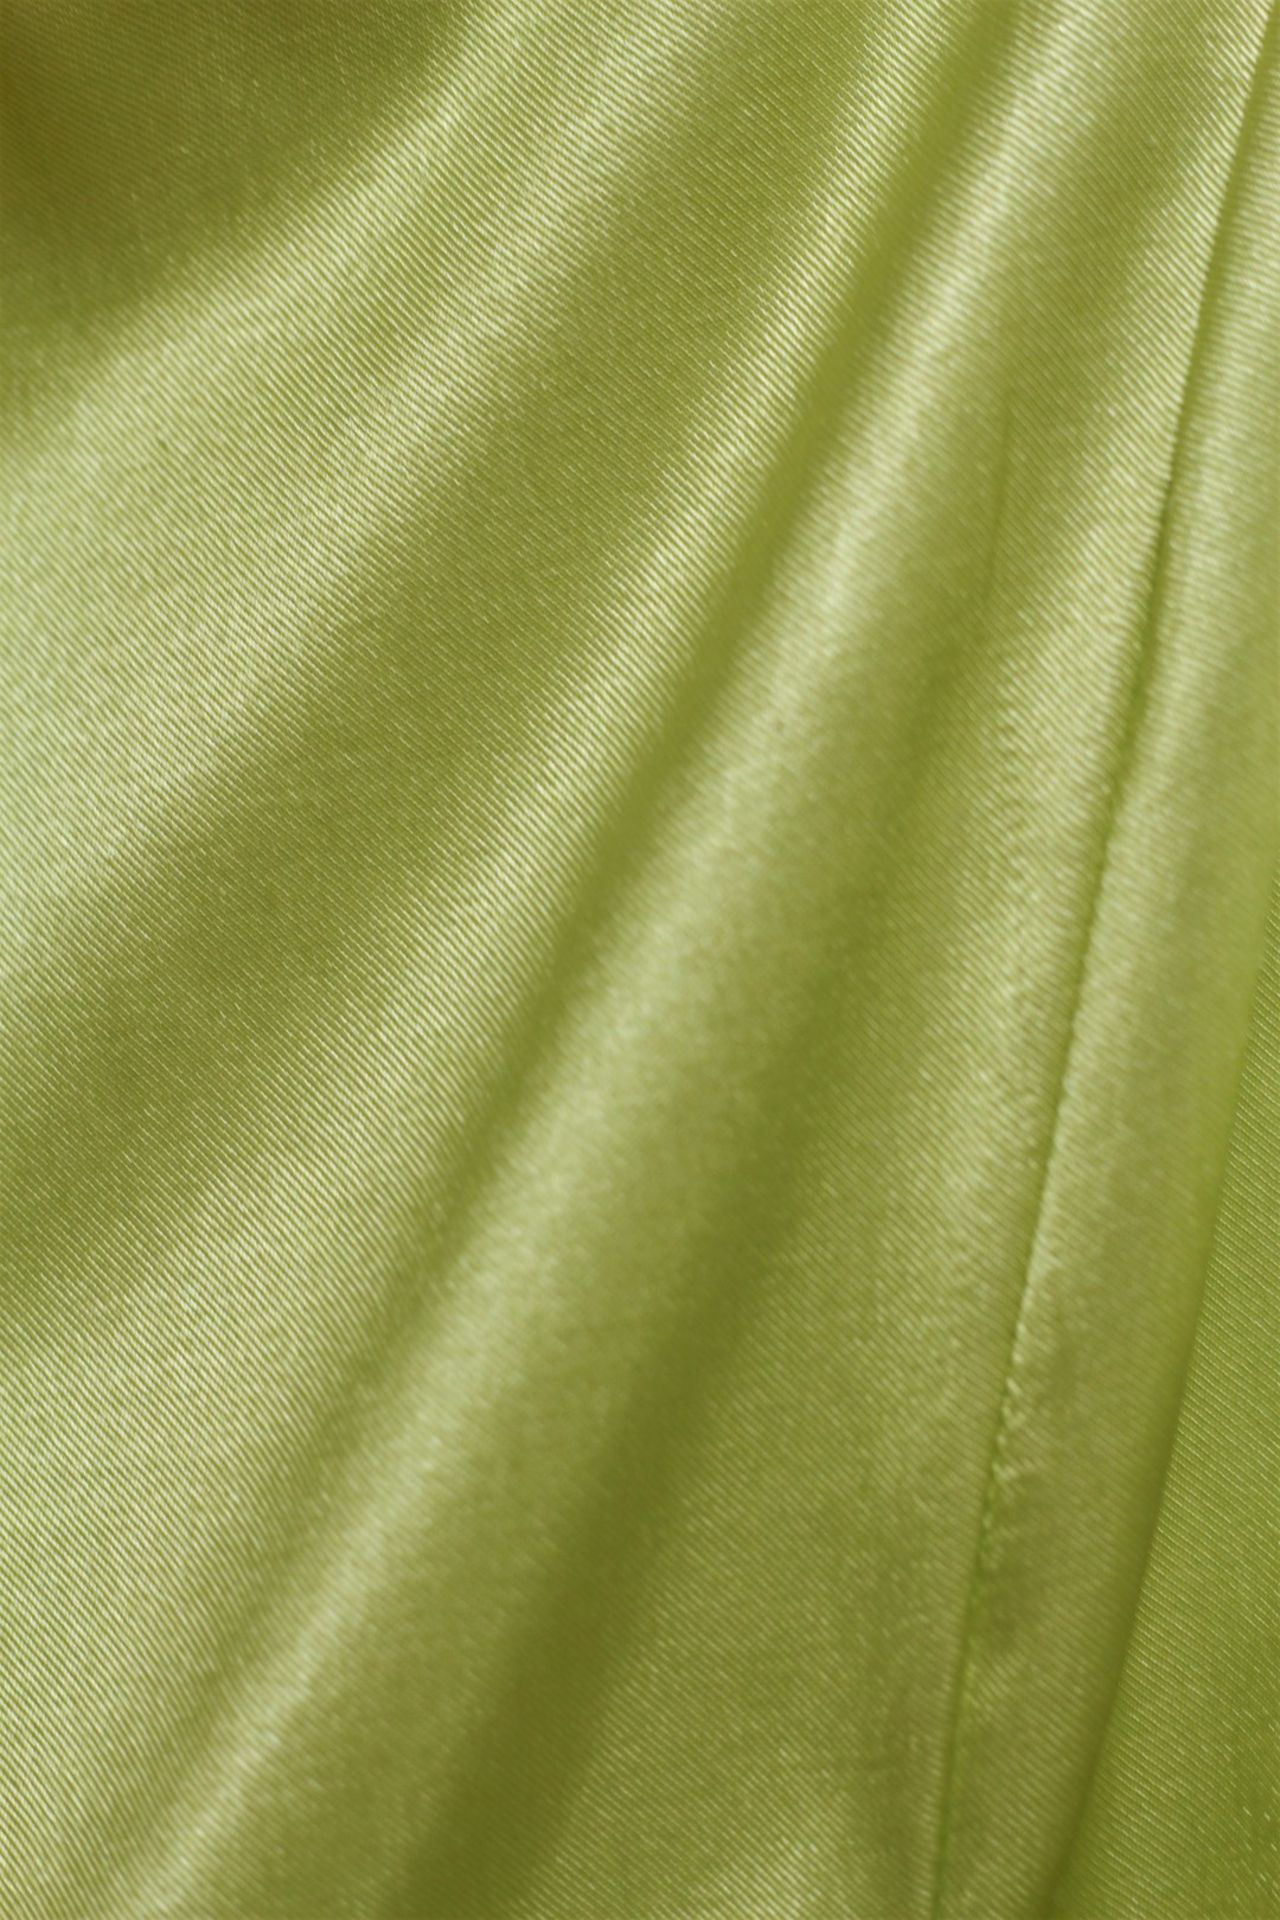 1 x Boutique Le Duc Lime Green Vest - From a High End Clothing Boutique In The - Image 5 of 9